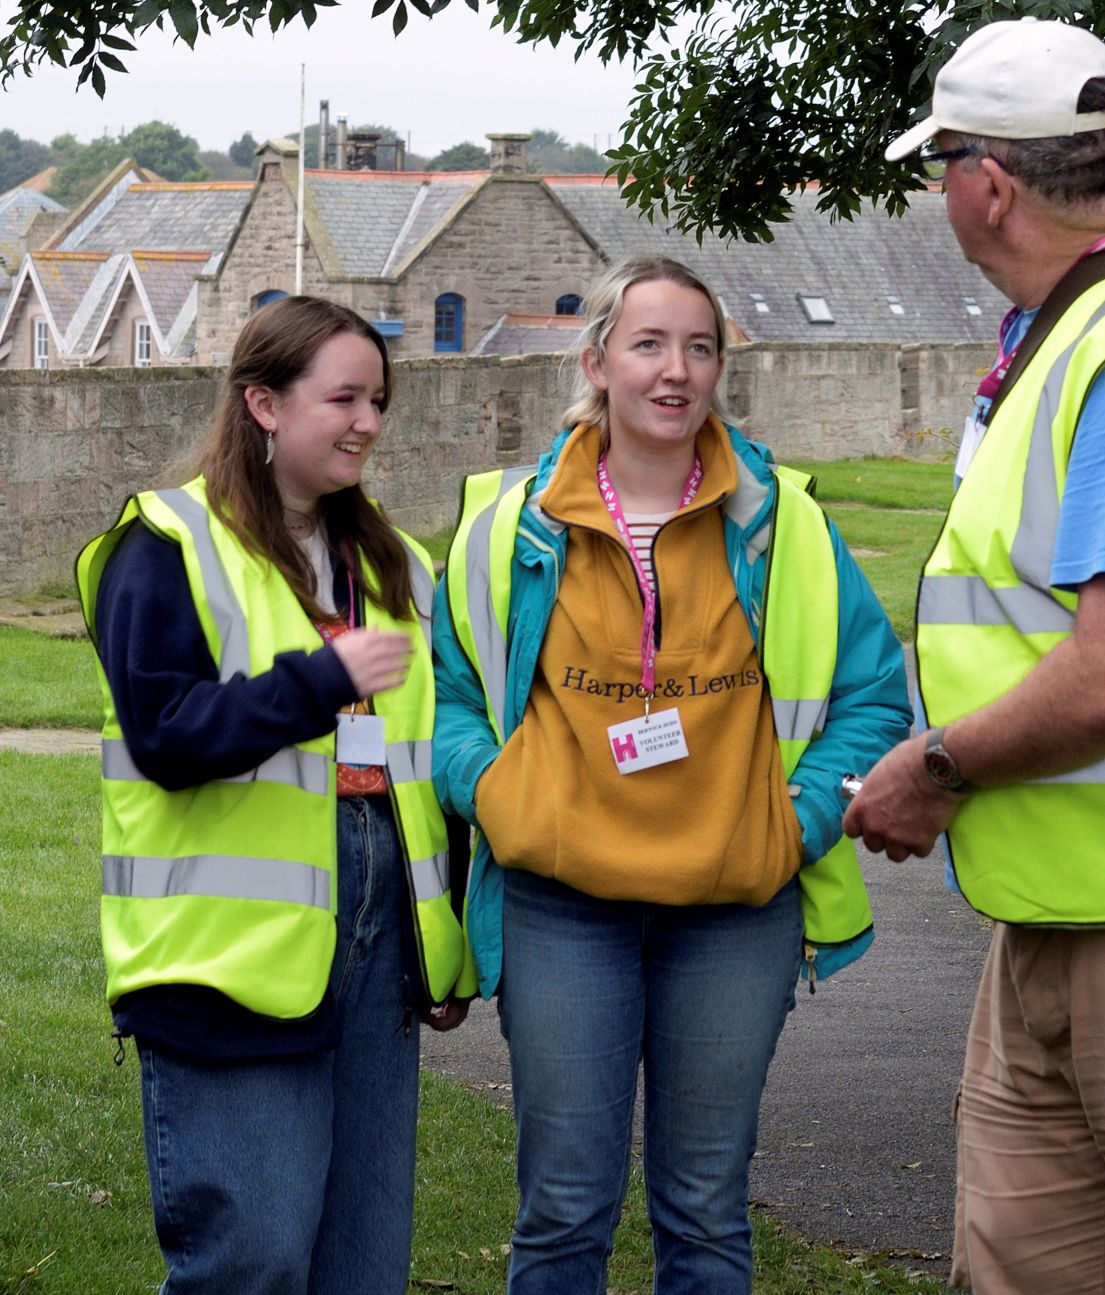 Three volunteers of varying ages chatting outside in high vis jackets